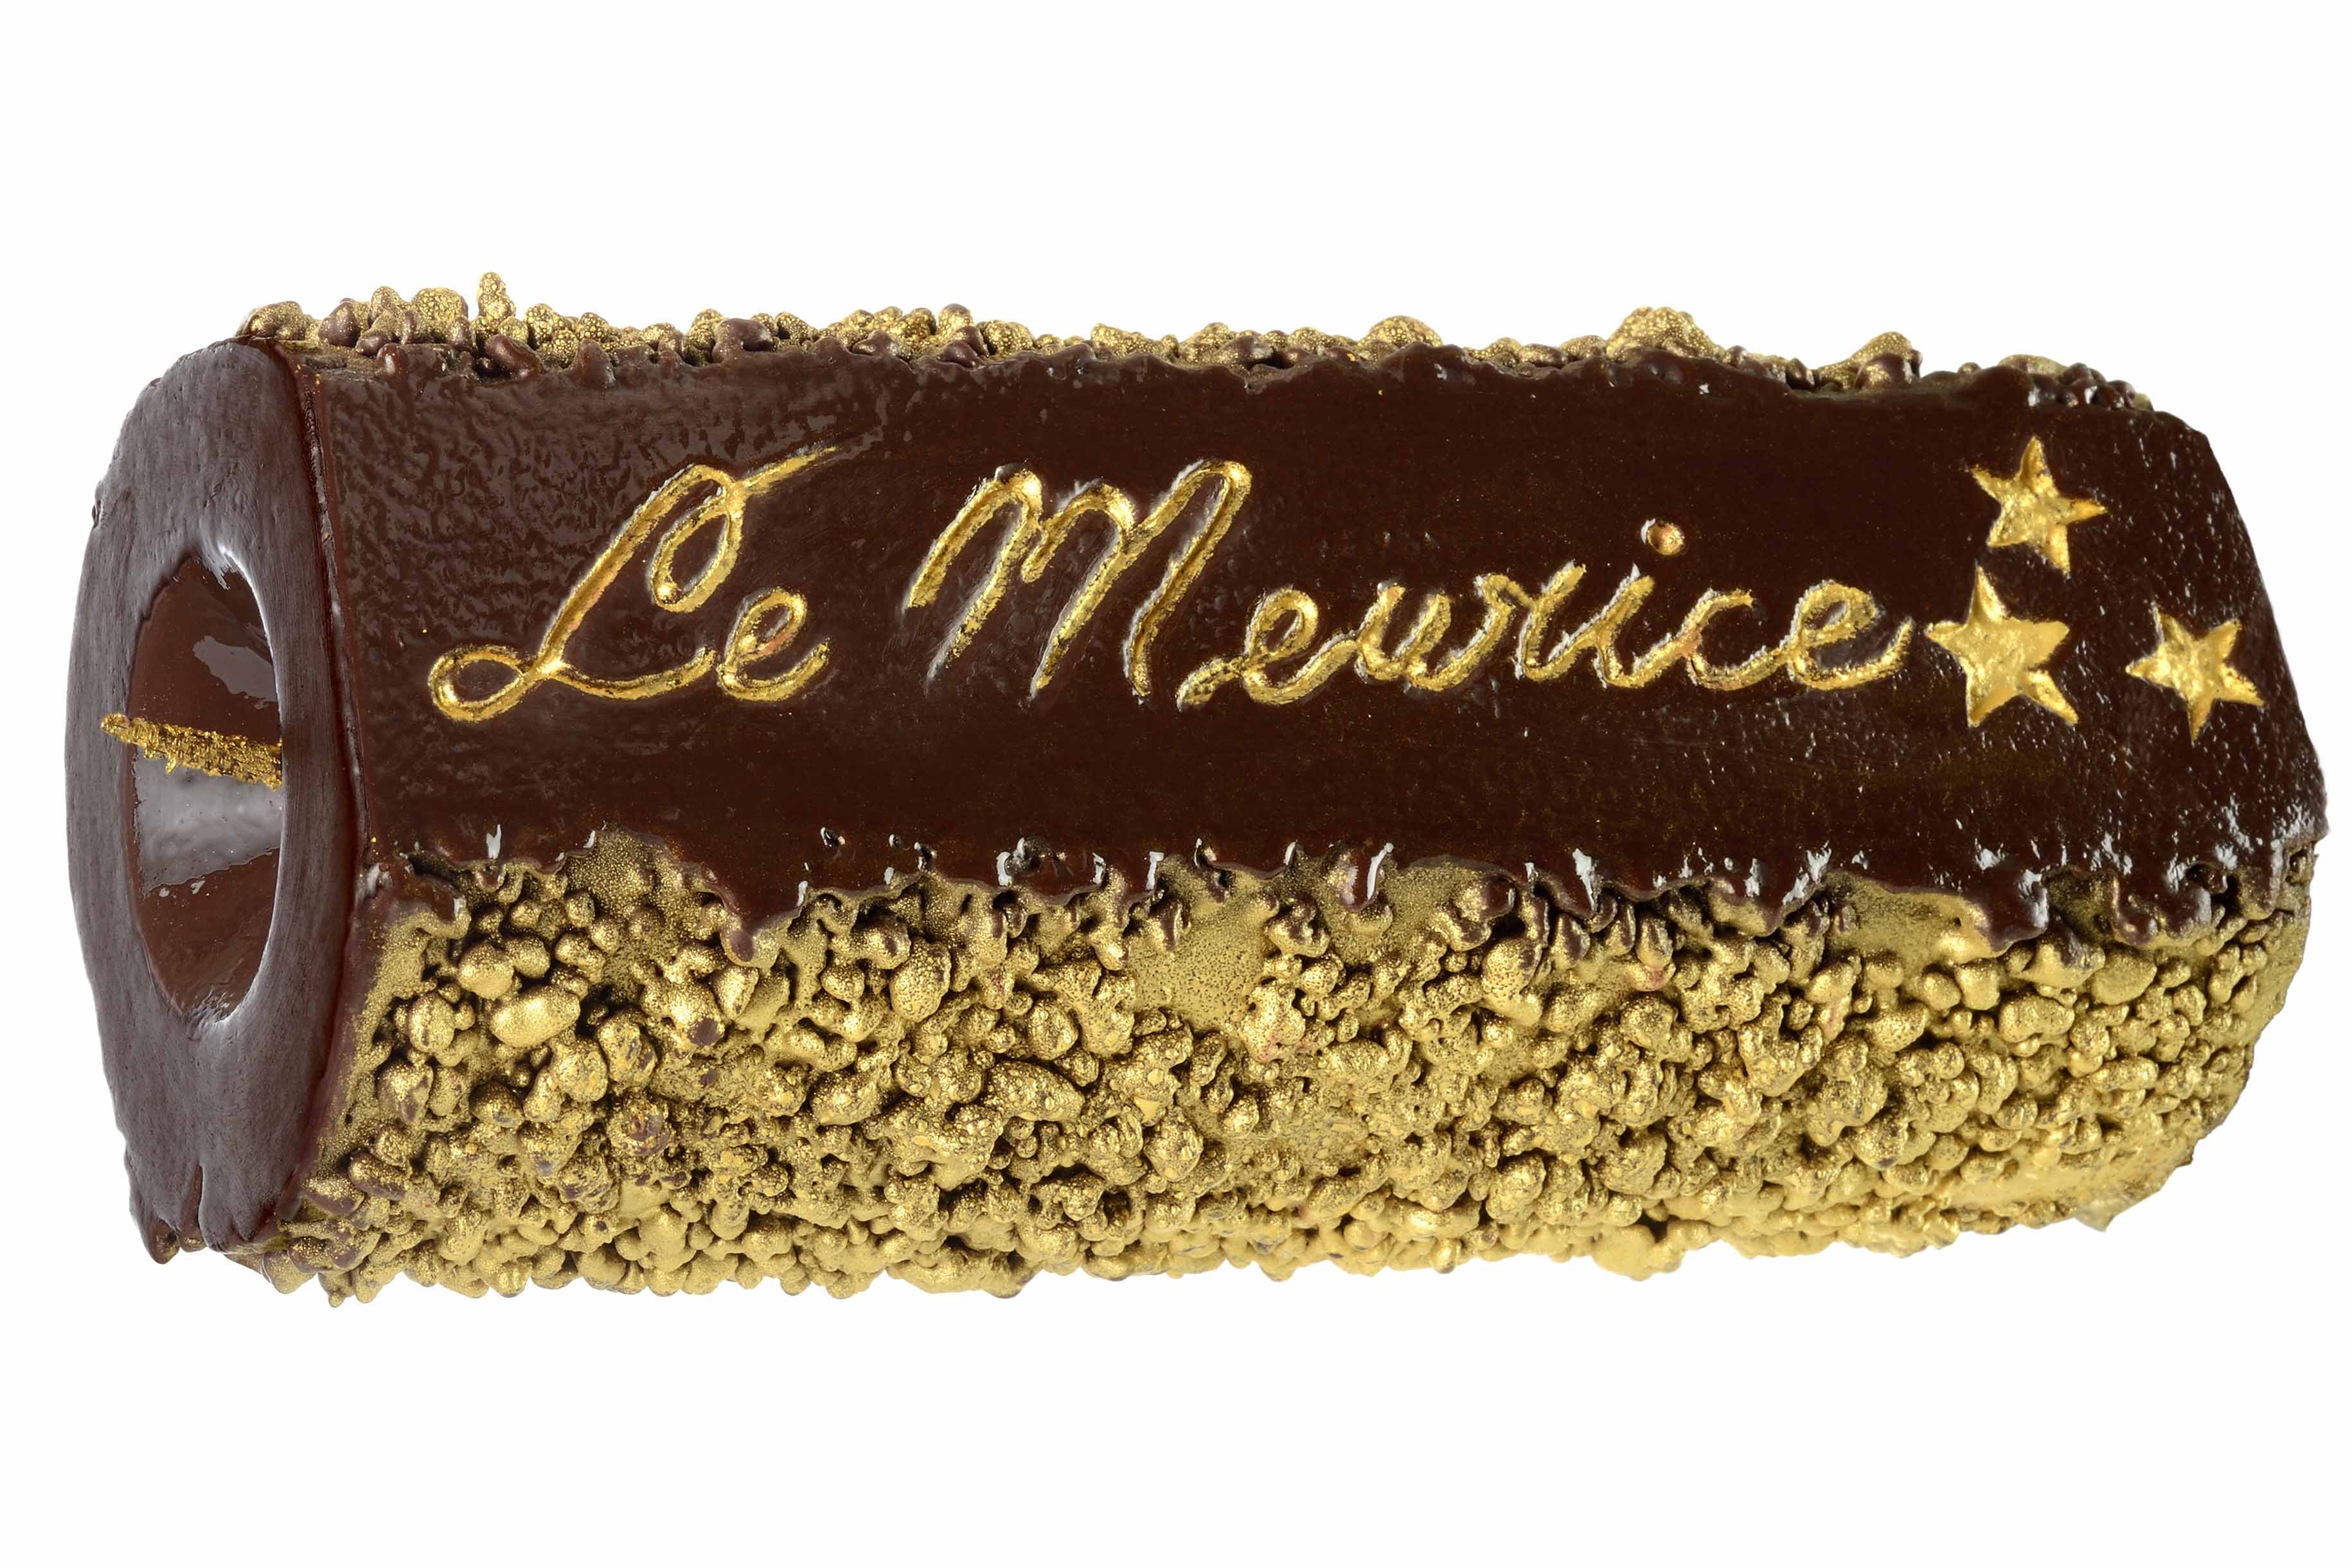 Travel PR News | Le Meurice holds a candle to Christmas and